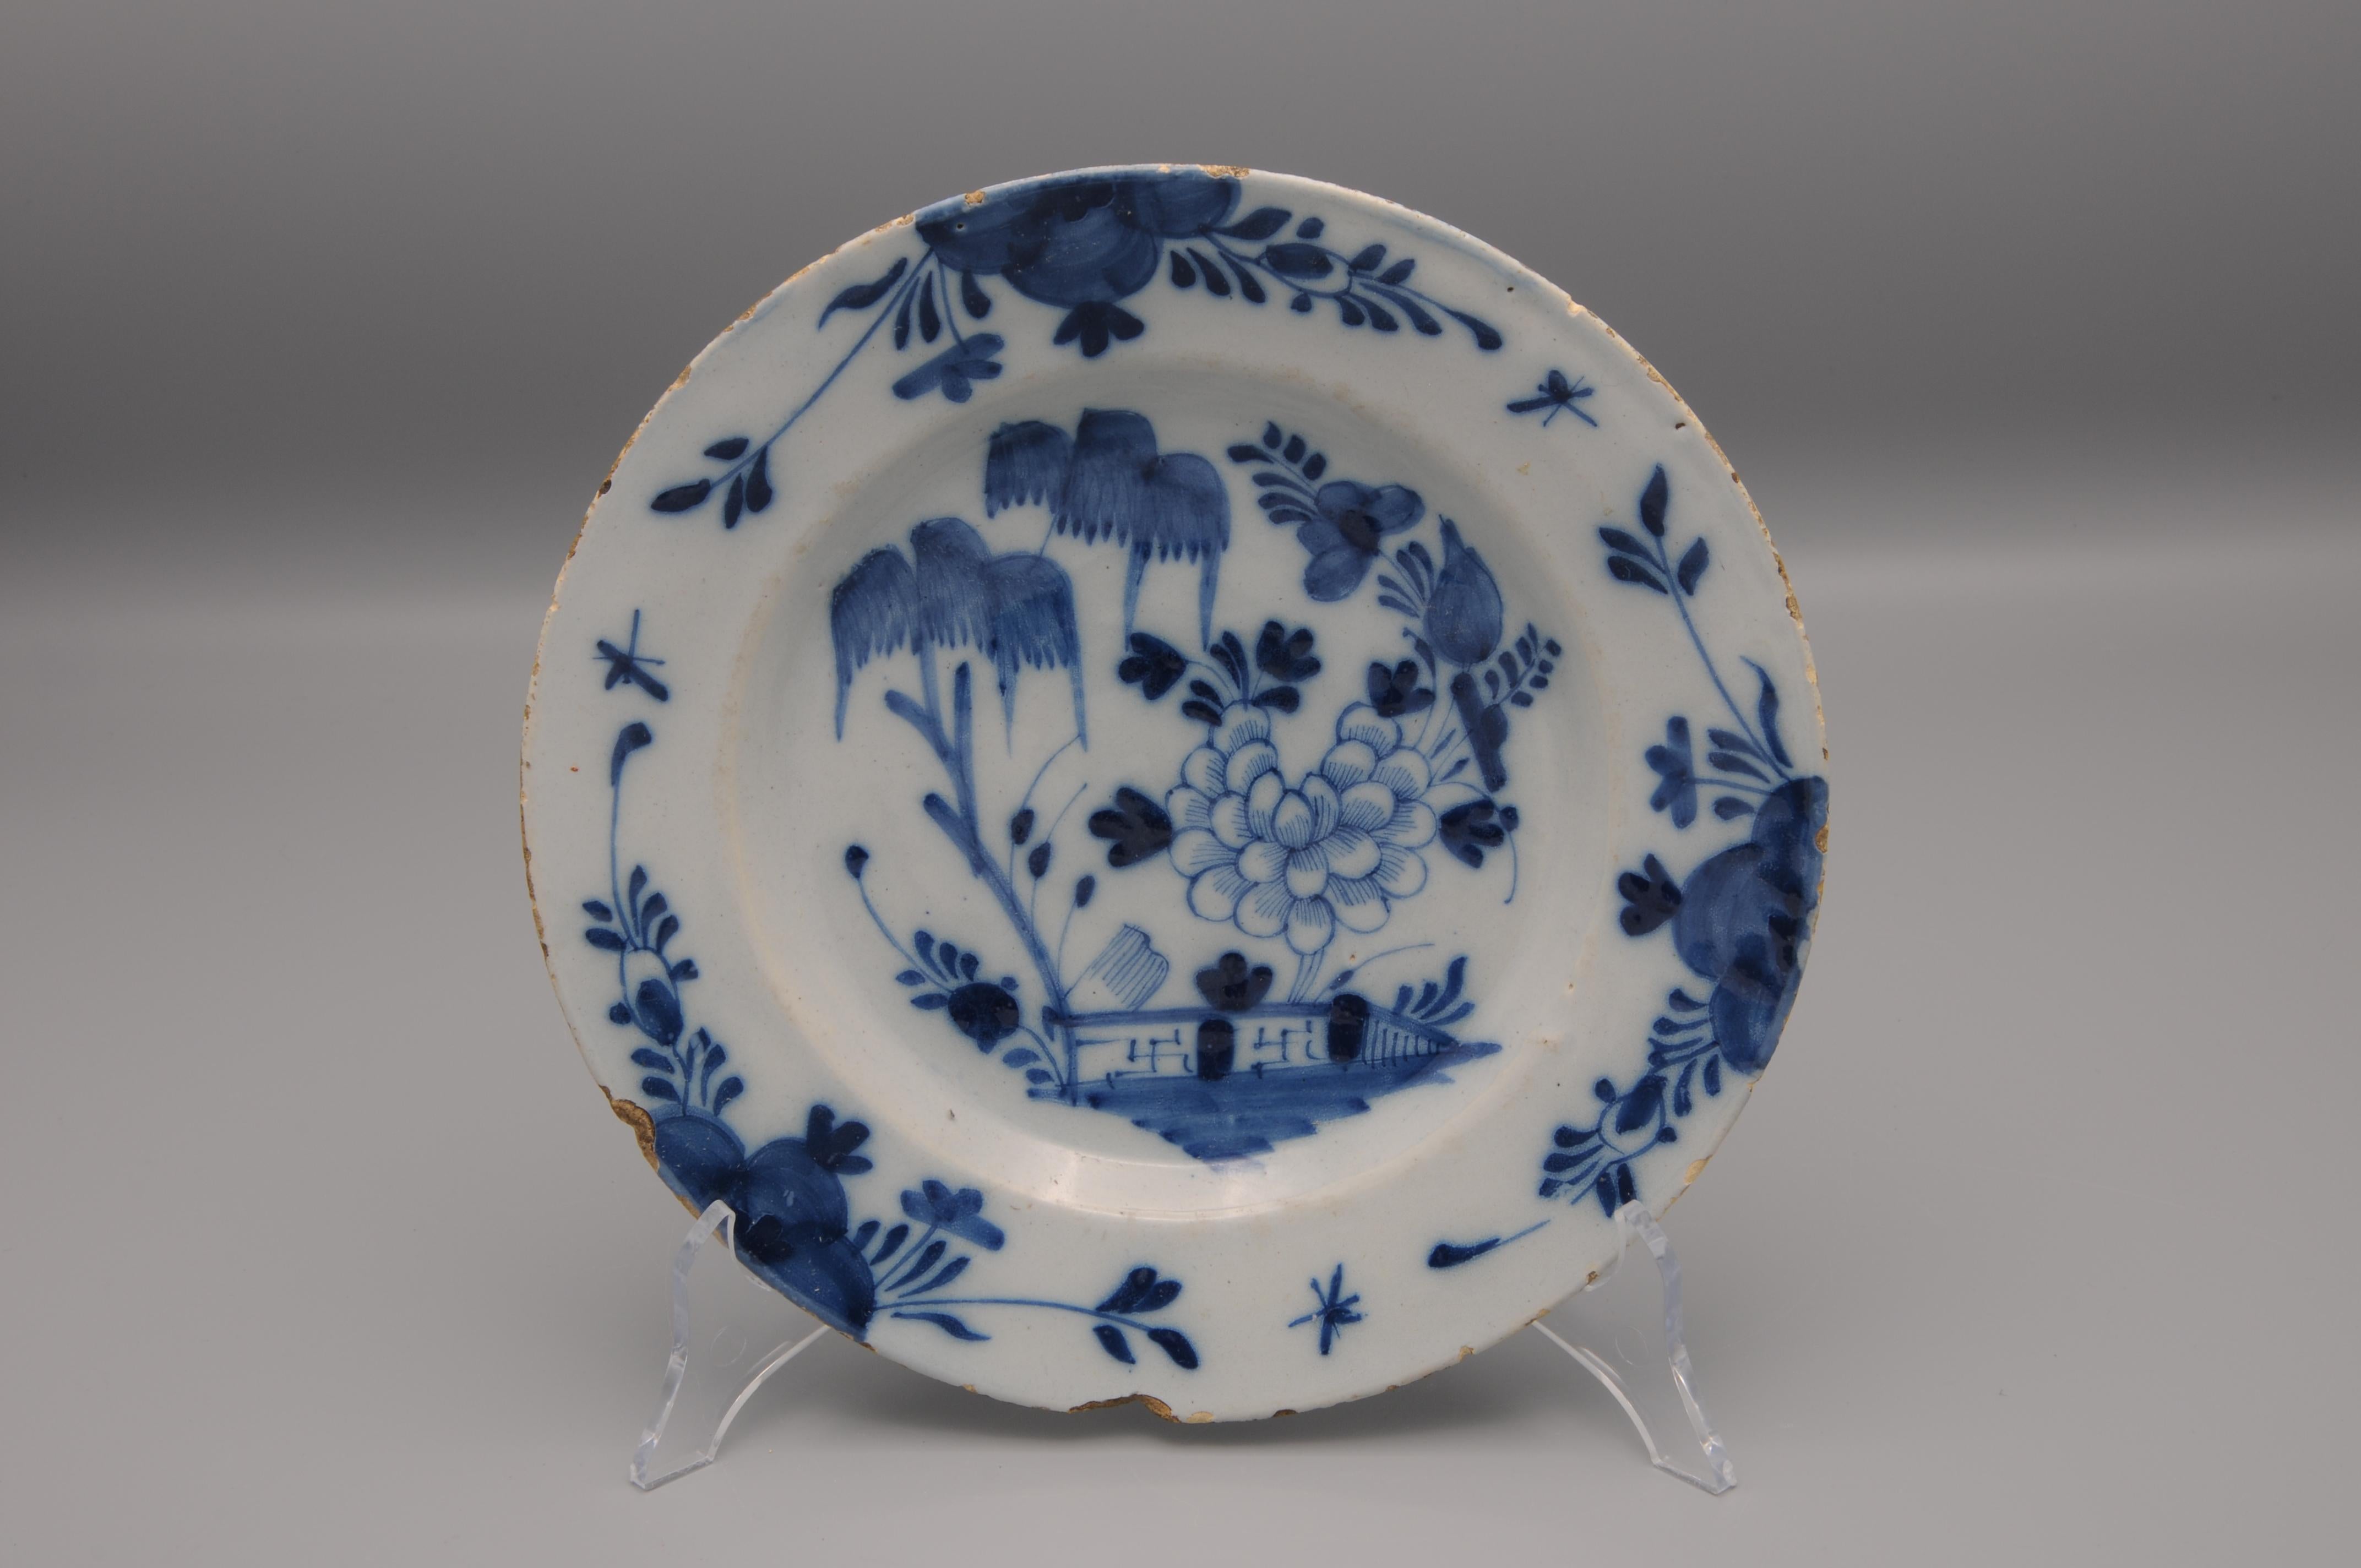 Dutch Delft  - 18th century 'Chinoiserie' Blue and White Delft Plate For Sale